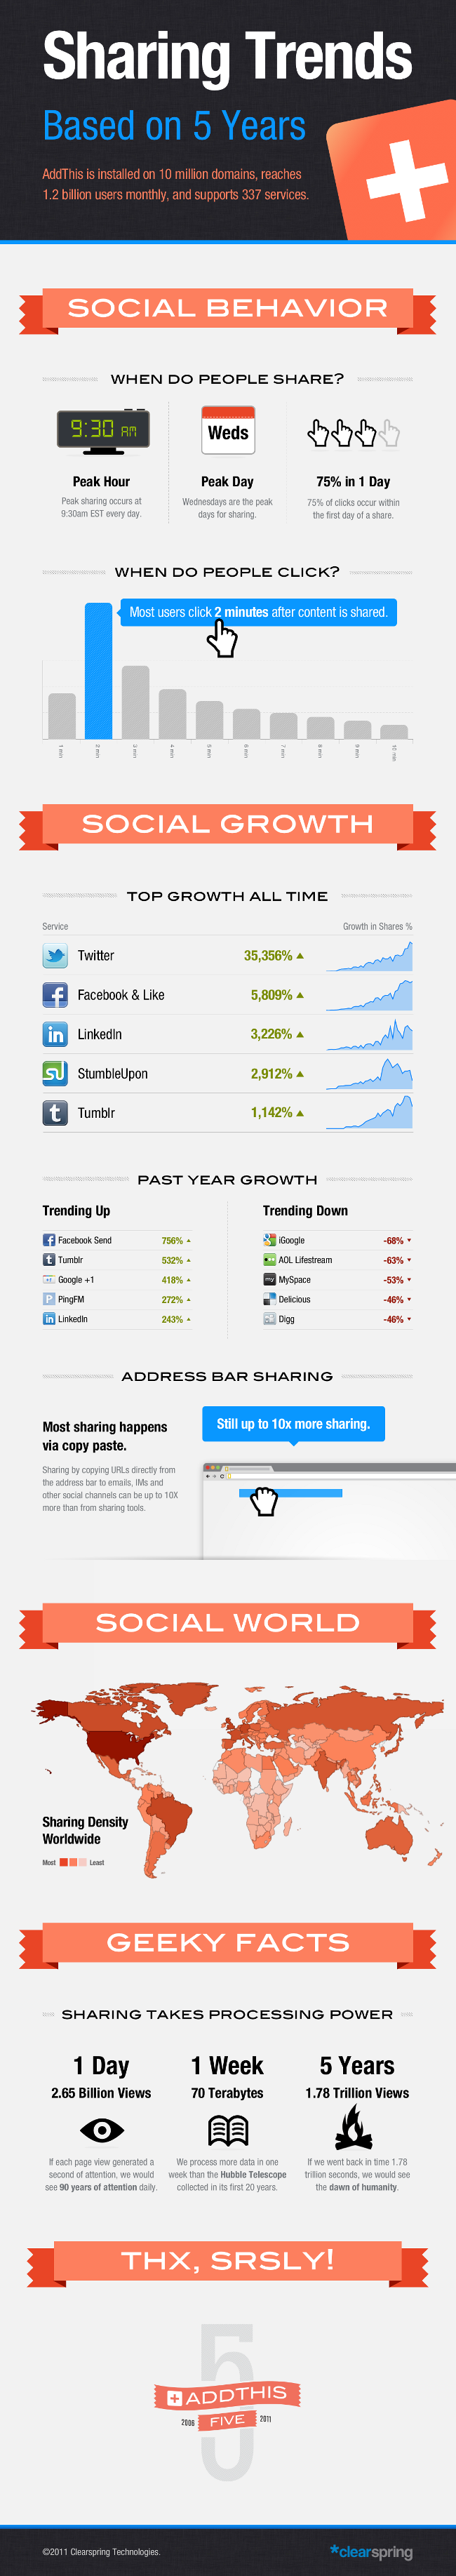 Sharing Trends by AddThis